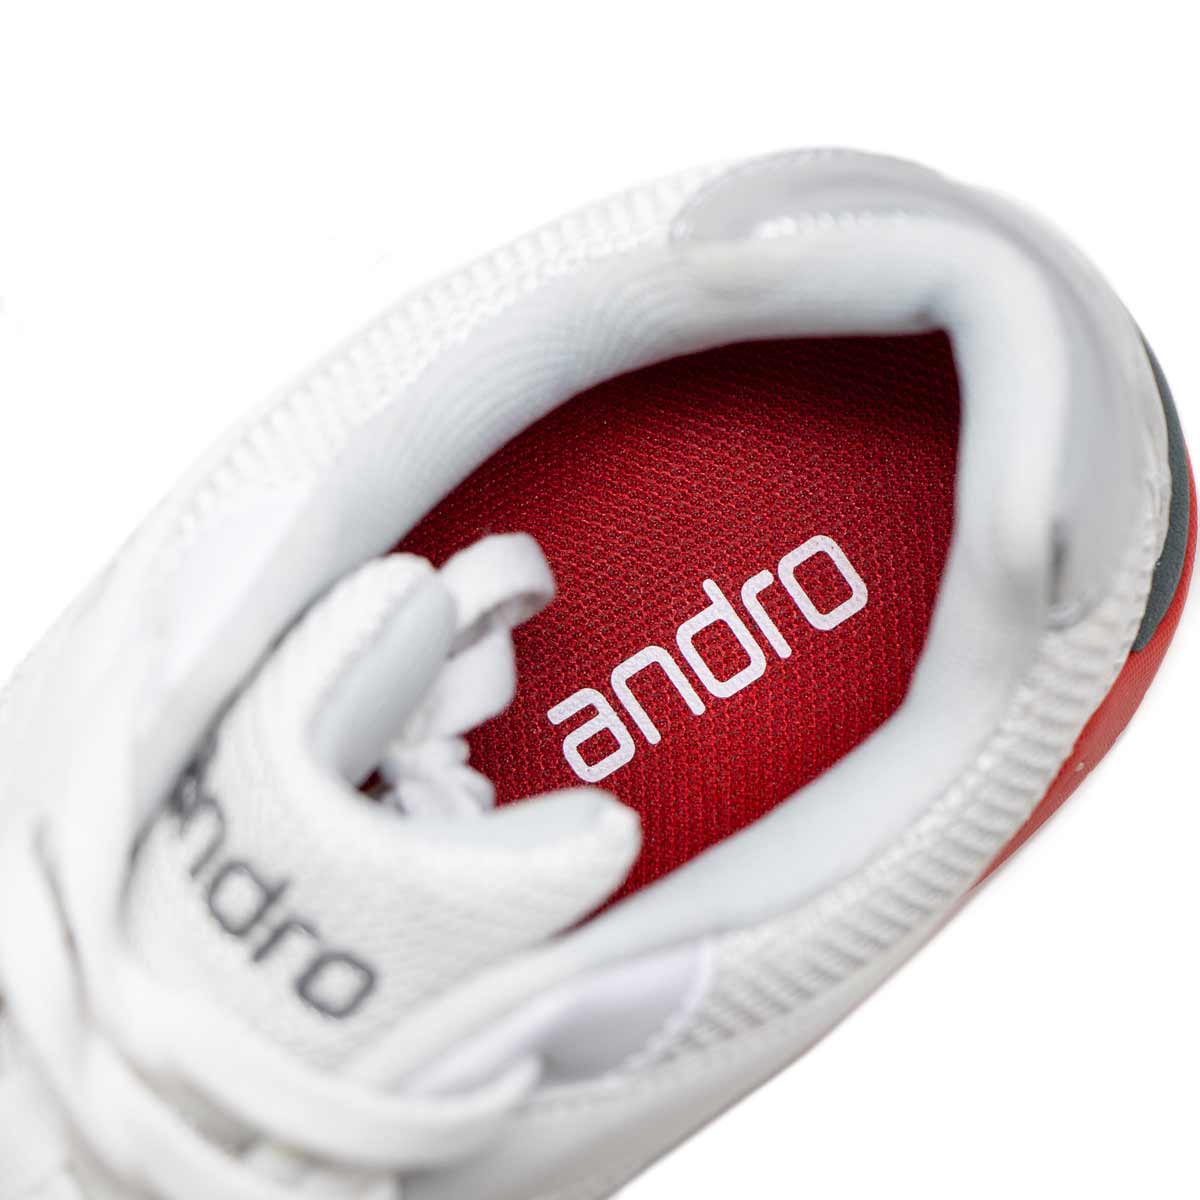 andro Shoe Shuffle Step 2 white/red 37